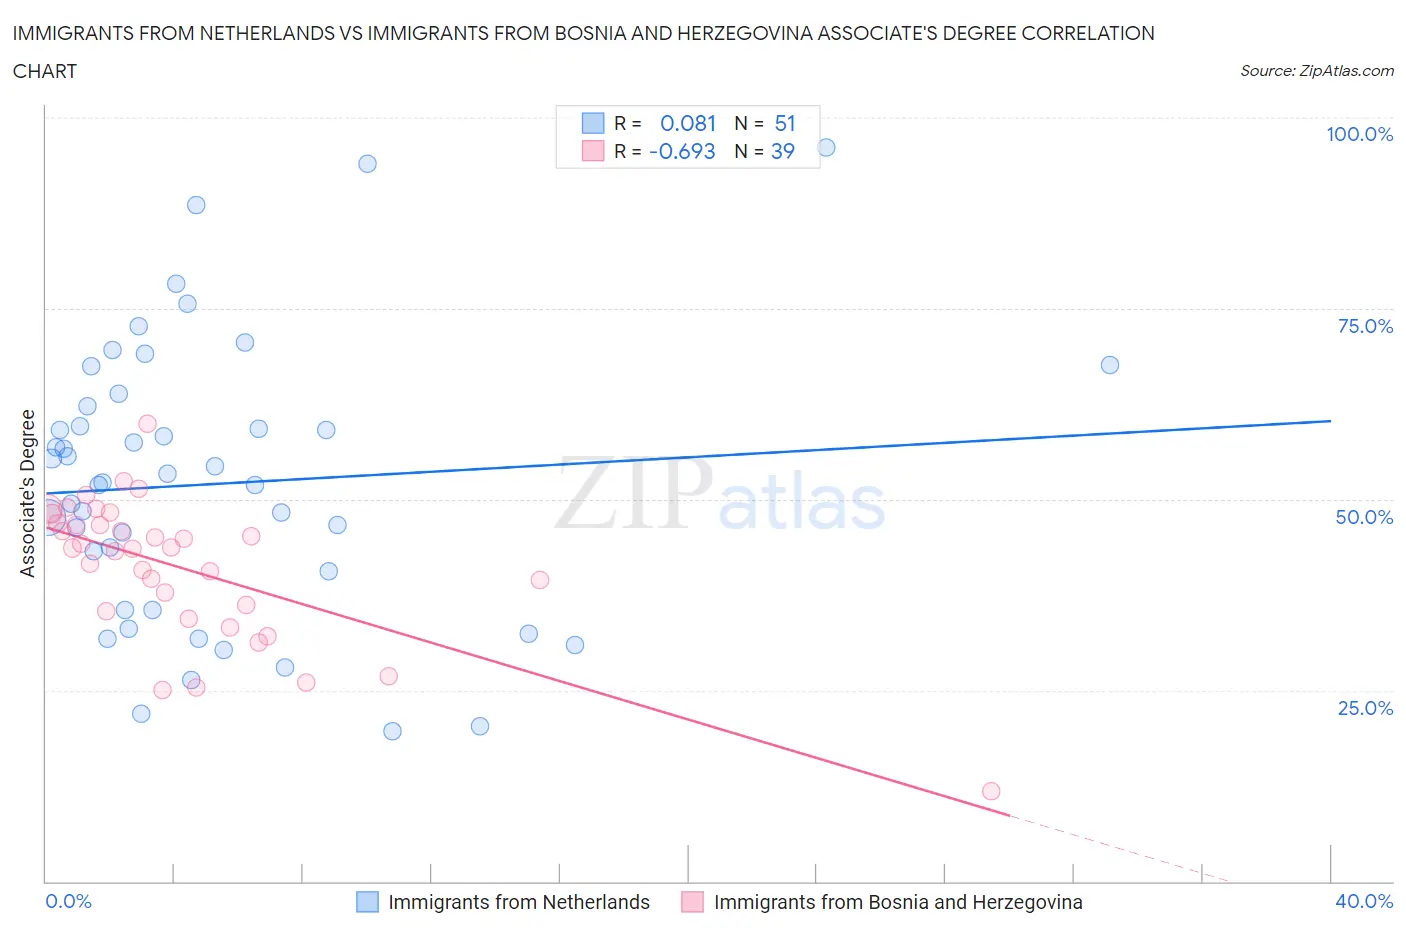 Immigrants from Netherlands vs Immigrants from Bosnia and Herzegovina Associate's Degree